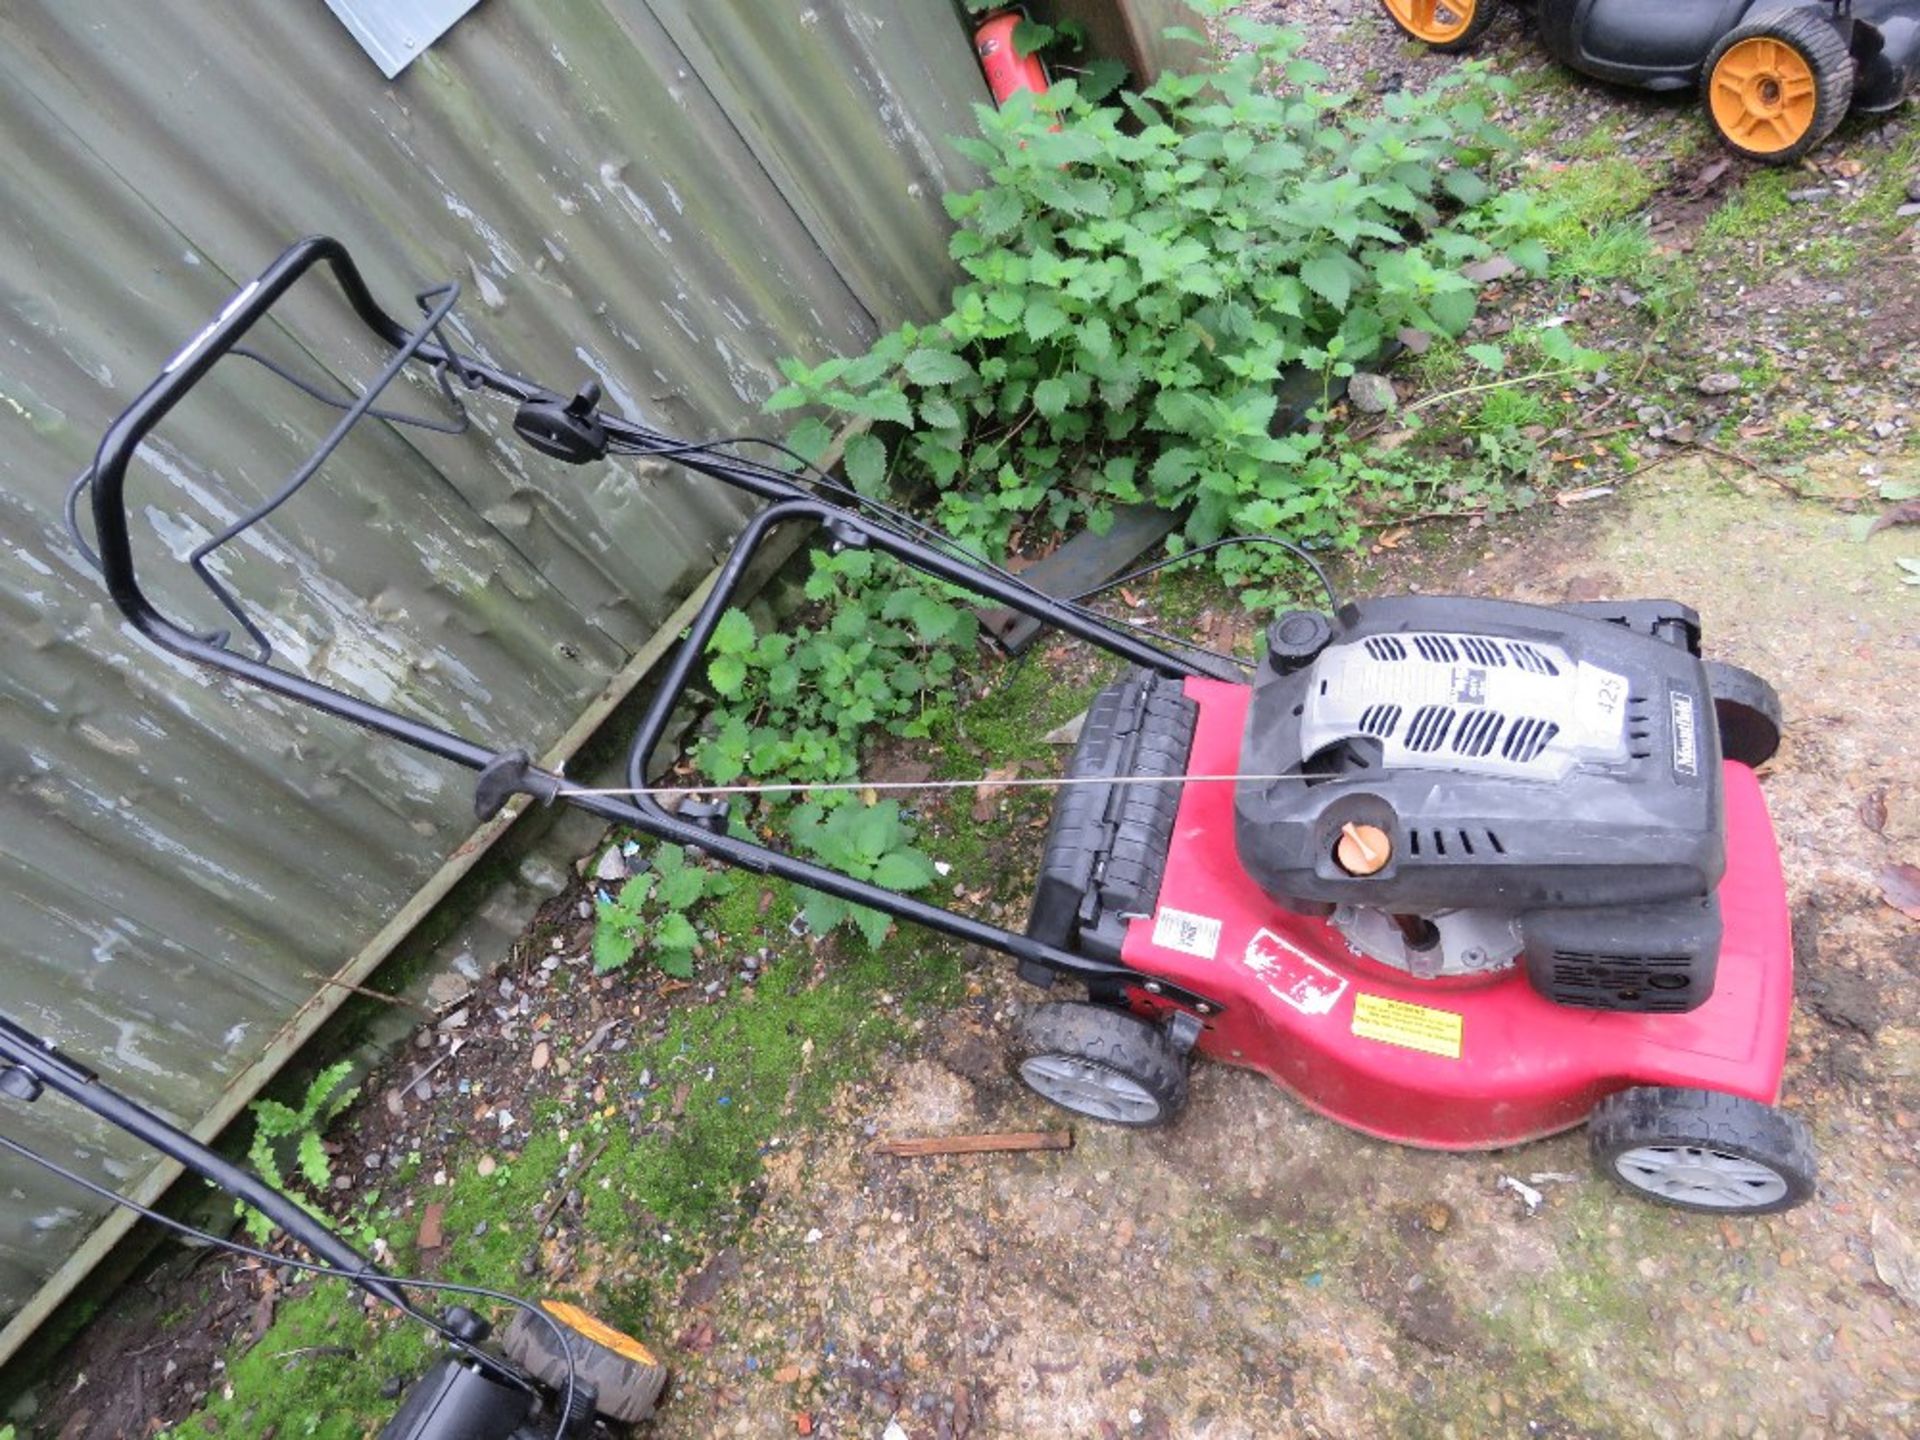 MOUNTFIELD PETROL ENGINED ROTARY LAWNMOWER. NO COLLECTOR. THIS LOT IS SOLD UNDER THE AUCTIONEER